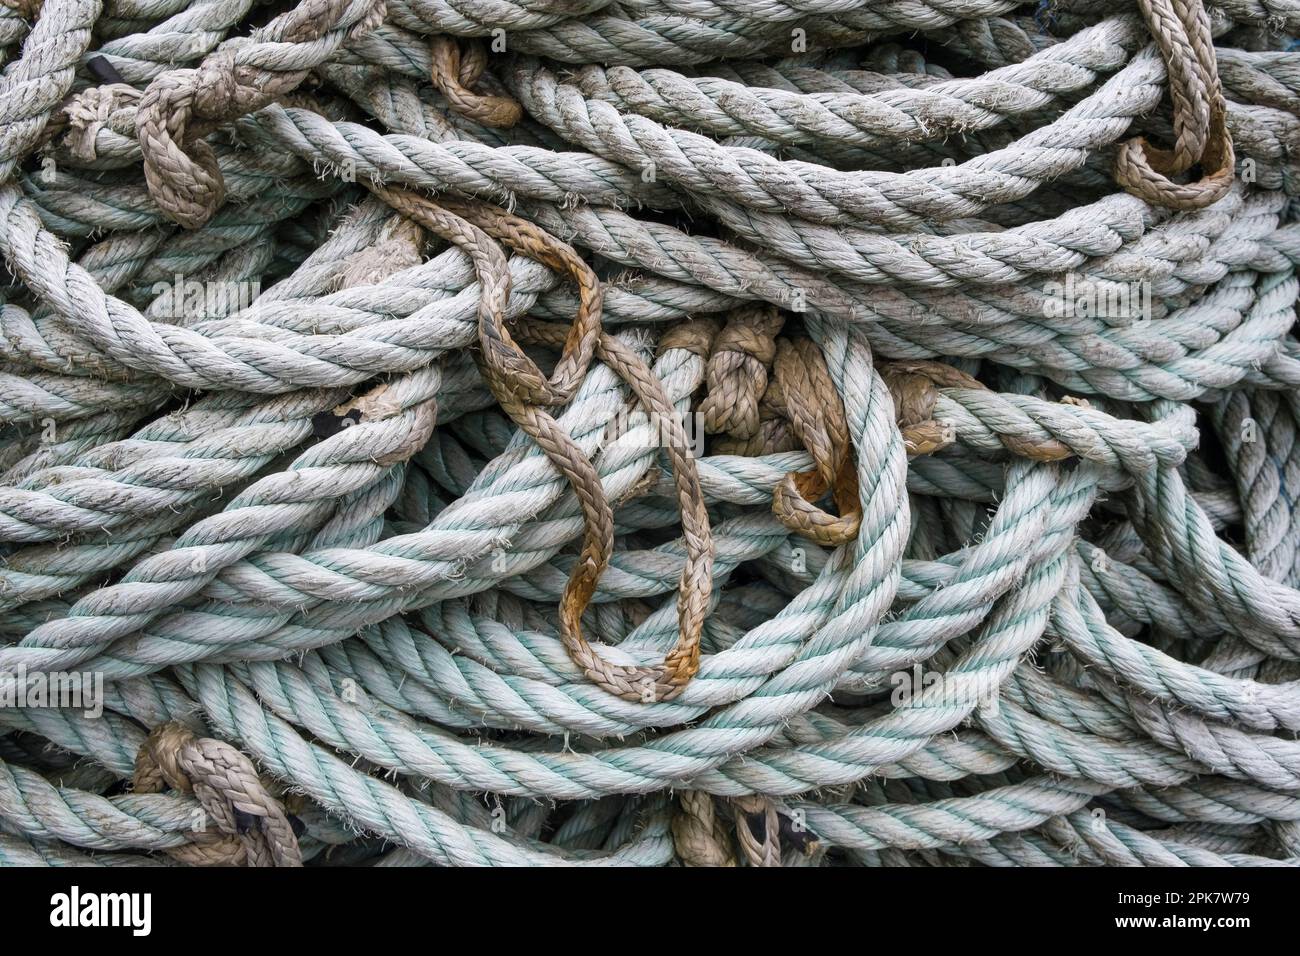 A pile of industrial rope. Stock Photo